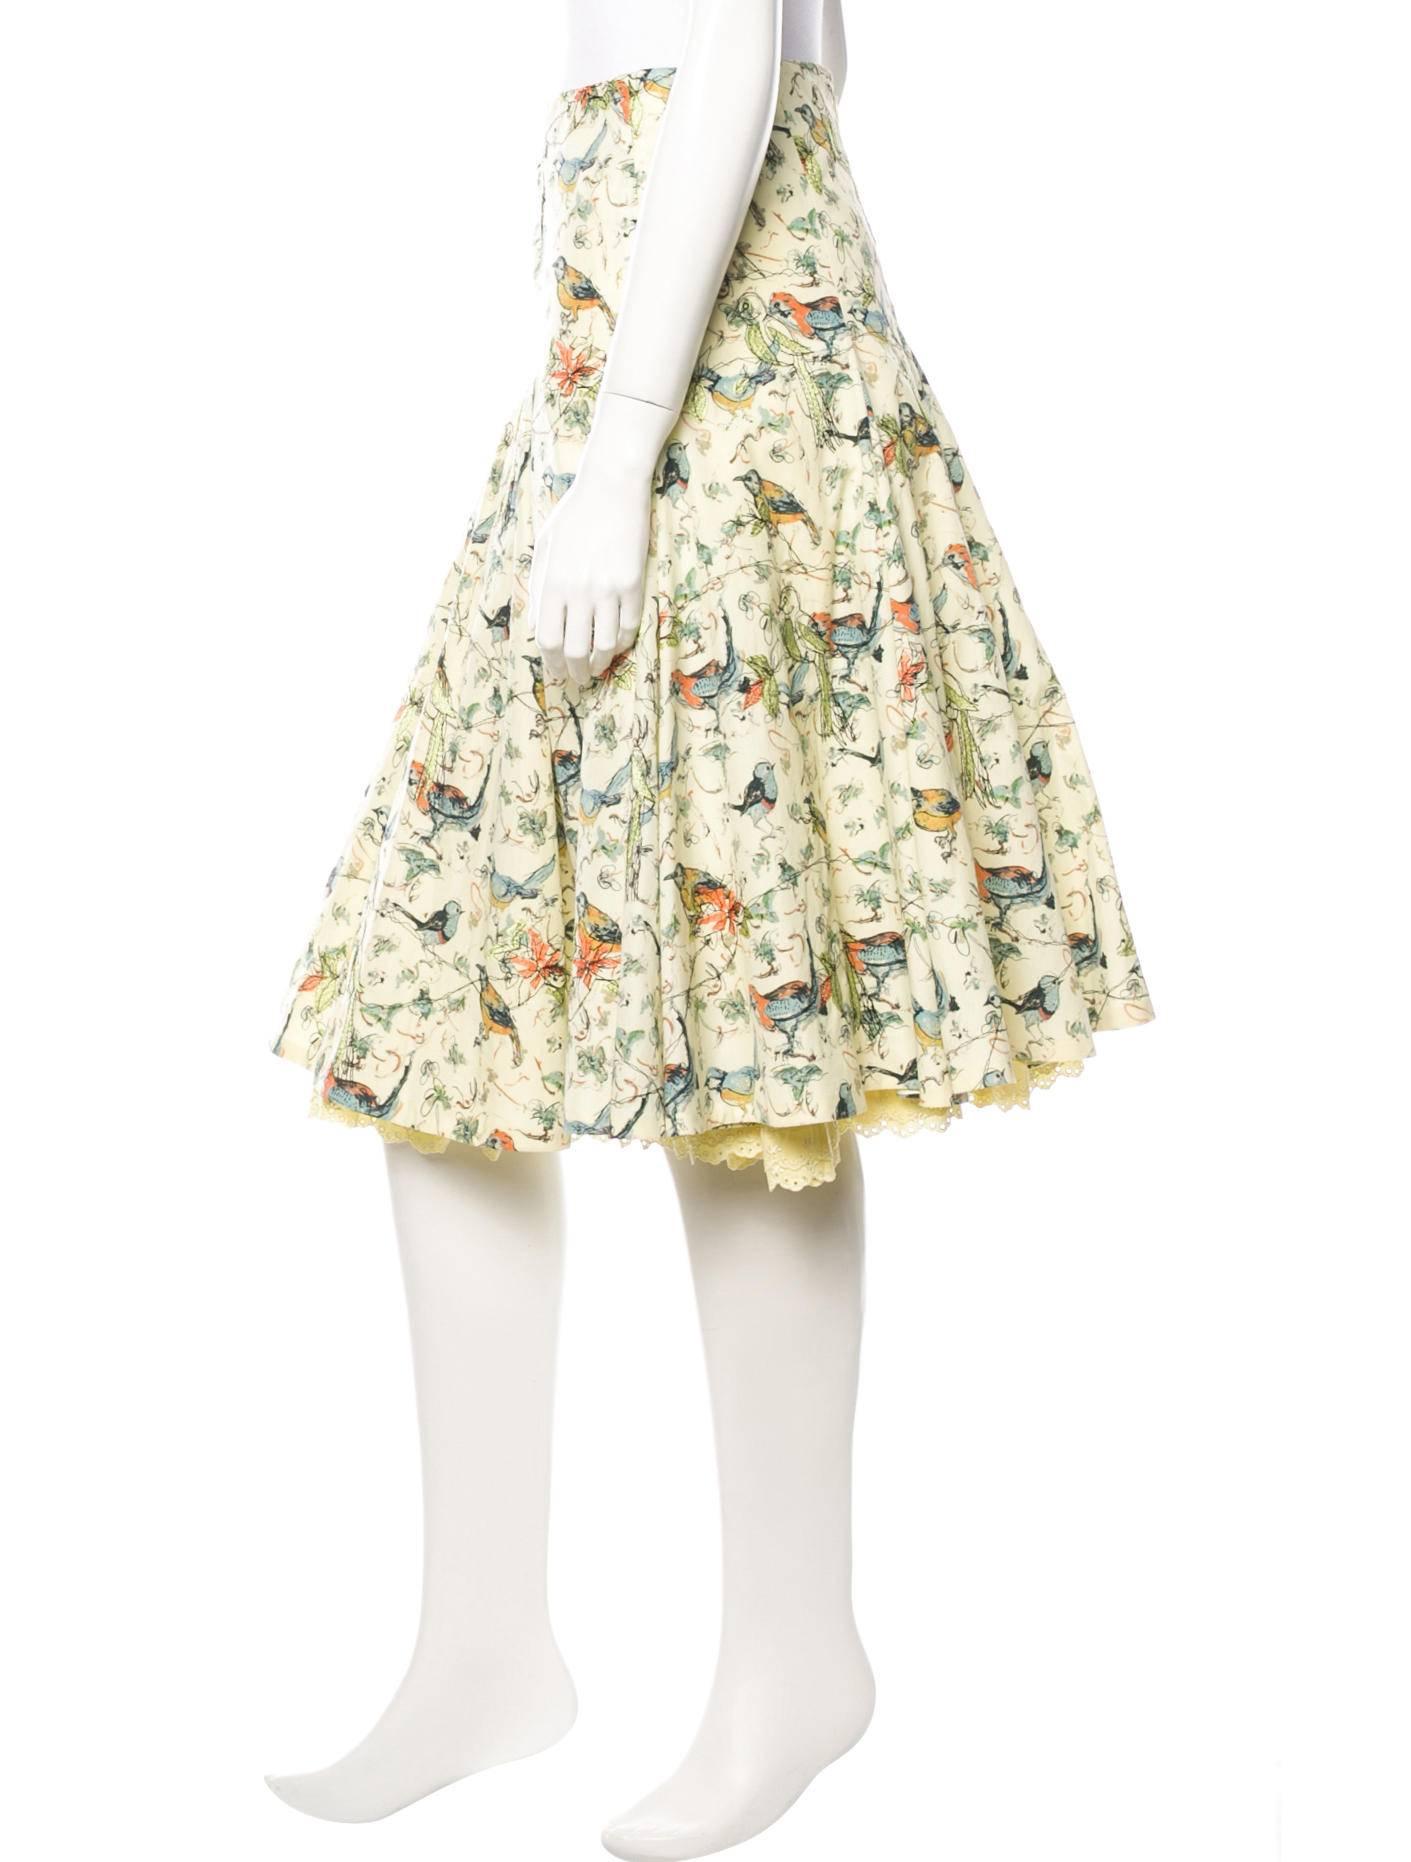 Bright Alexander McQueen cotton skirt with bird print and intricate embroidery from his Spring Summer 2005 Collection, 